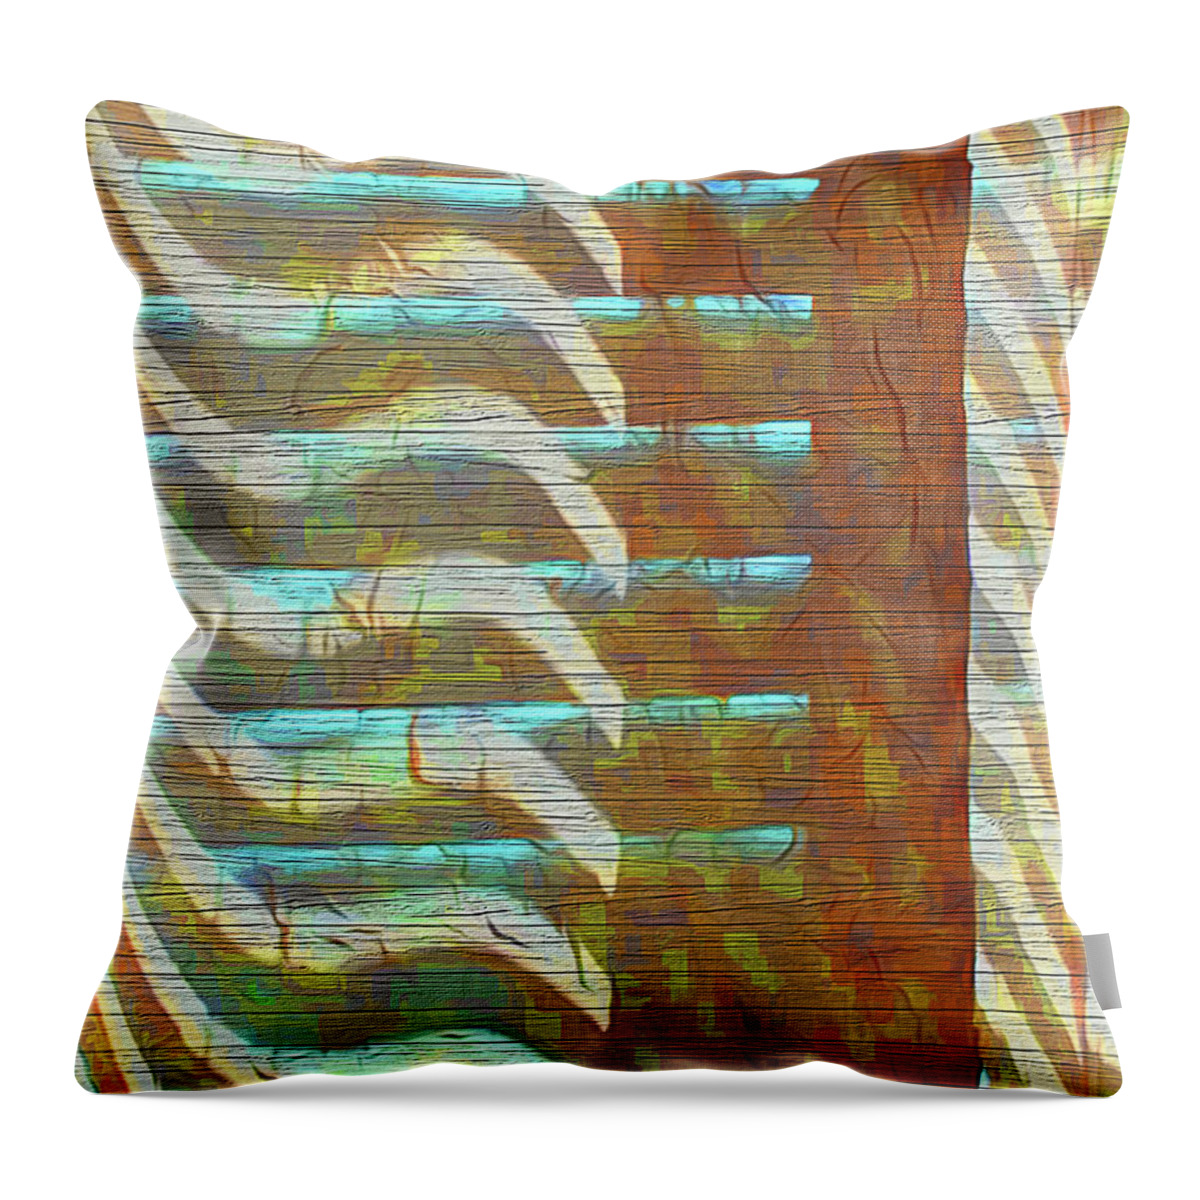 Curtain Throw Pillow featuring the photograph Textured Patterns by Reynaldo Williams